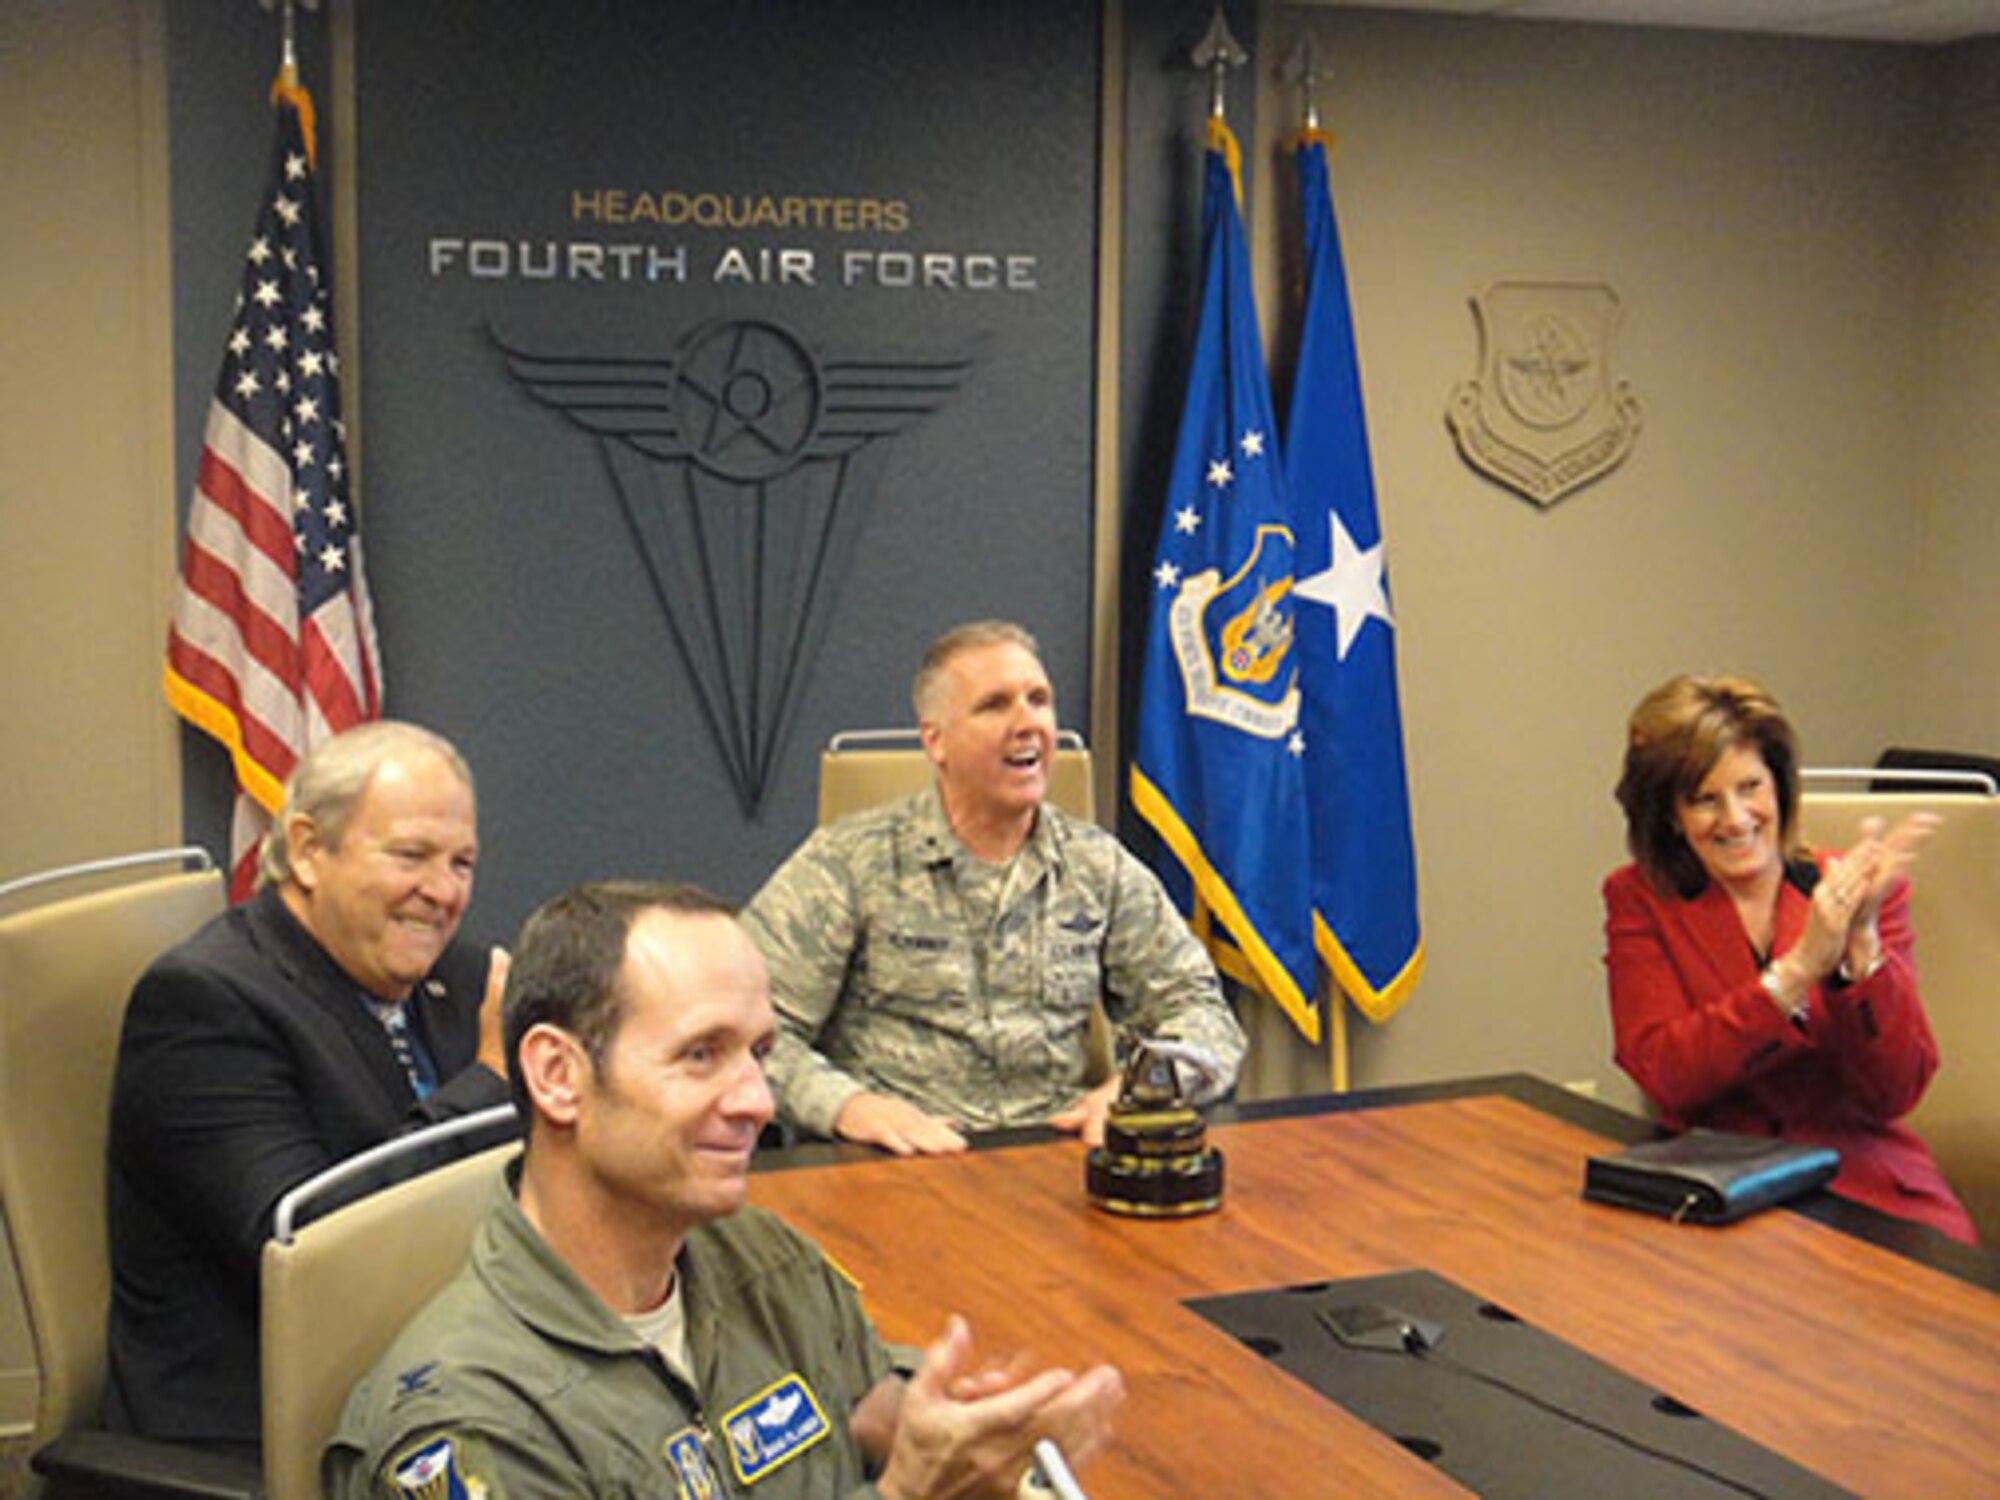 Col. Douglas Planer (foreground), 4th Air Force A3 Director, joins (from left) Roger Rupp, Riverside Military Affairs Committee Chairman; Brig. Gen. John C. Flournoy Jr., 4th Air Force Commander; and Cindy Roth, Greater Riverside Chambers of Commerce President, in congratulating the 349th Air Mobility Wing, Travis Air Force Base, Calif., for being named the best wing in 4th Air Force for 2012 and 2013 combined. Flournoy surprised the wing’s senior leadership with the announcement via teleconference on Friday, Dec. 6, 2013. (Courtesy photo)